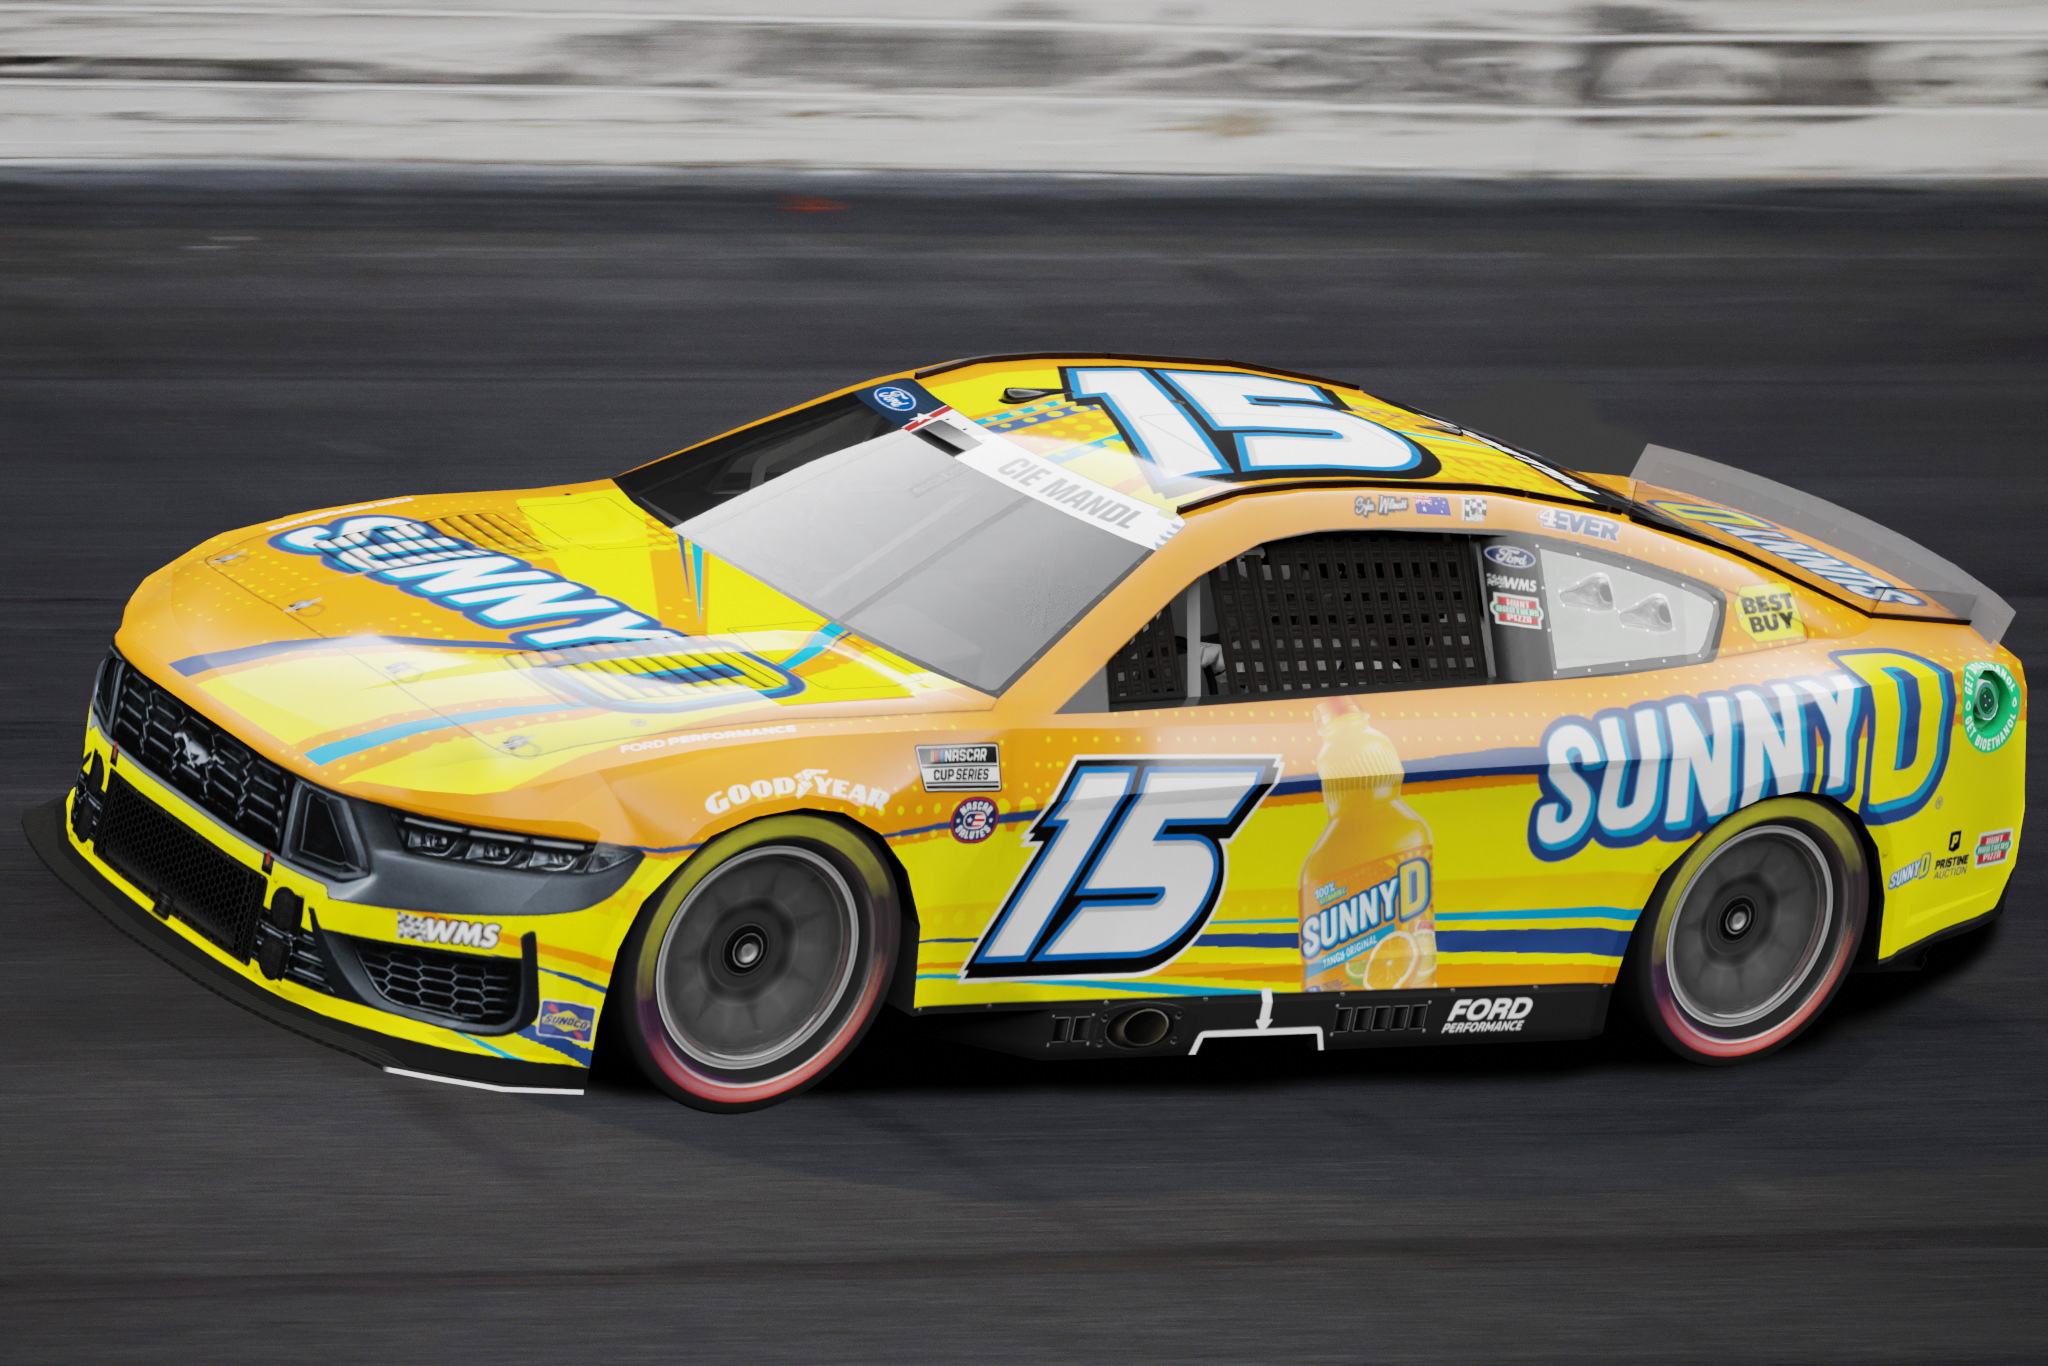 #15 SUNNY D 2 charlotte.png